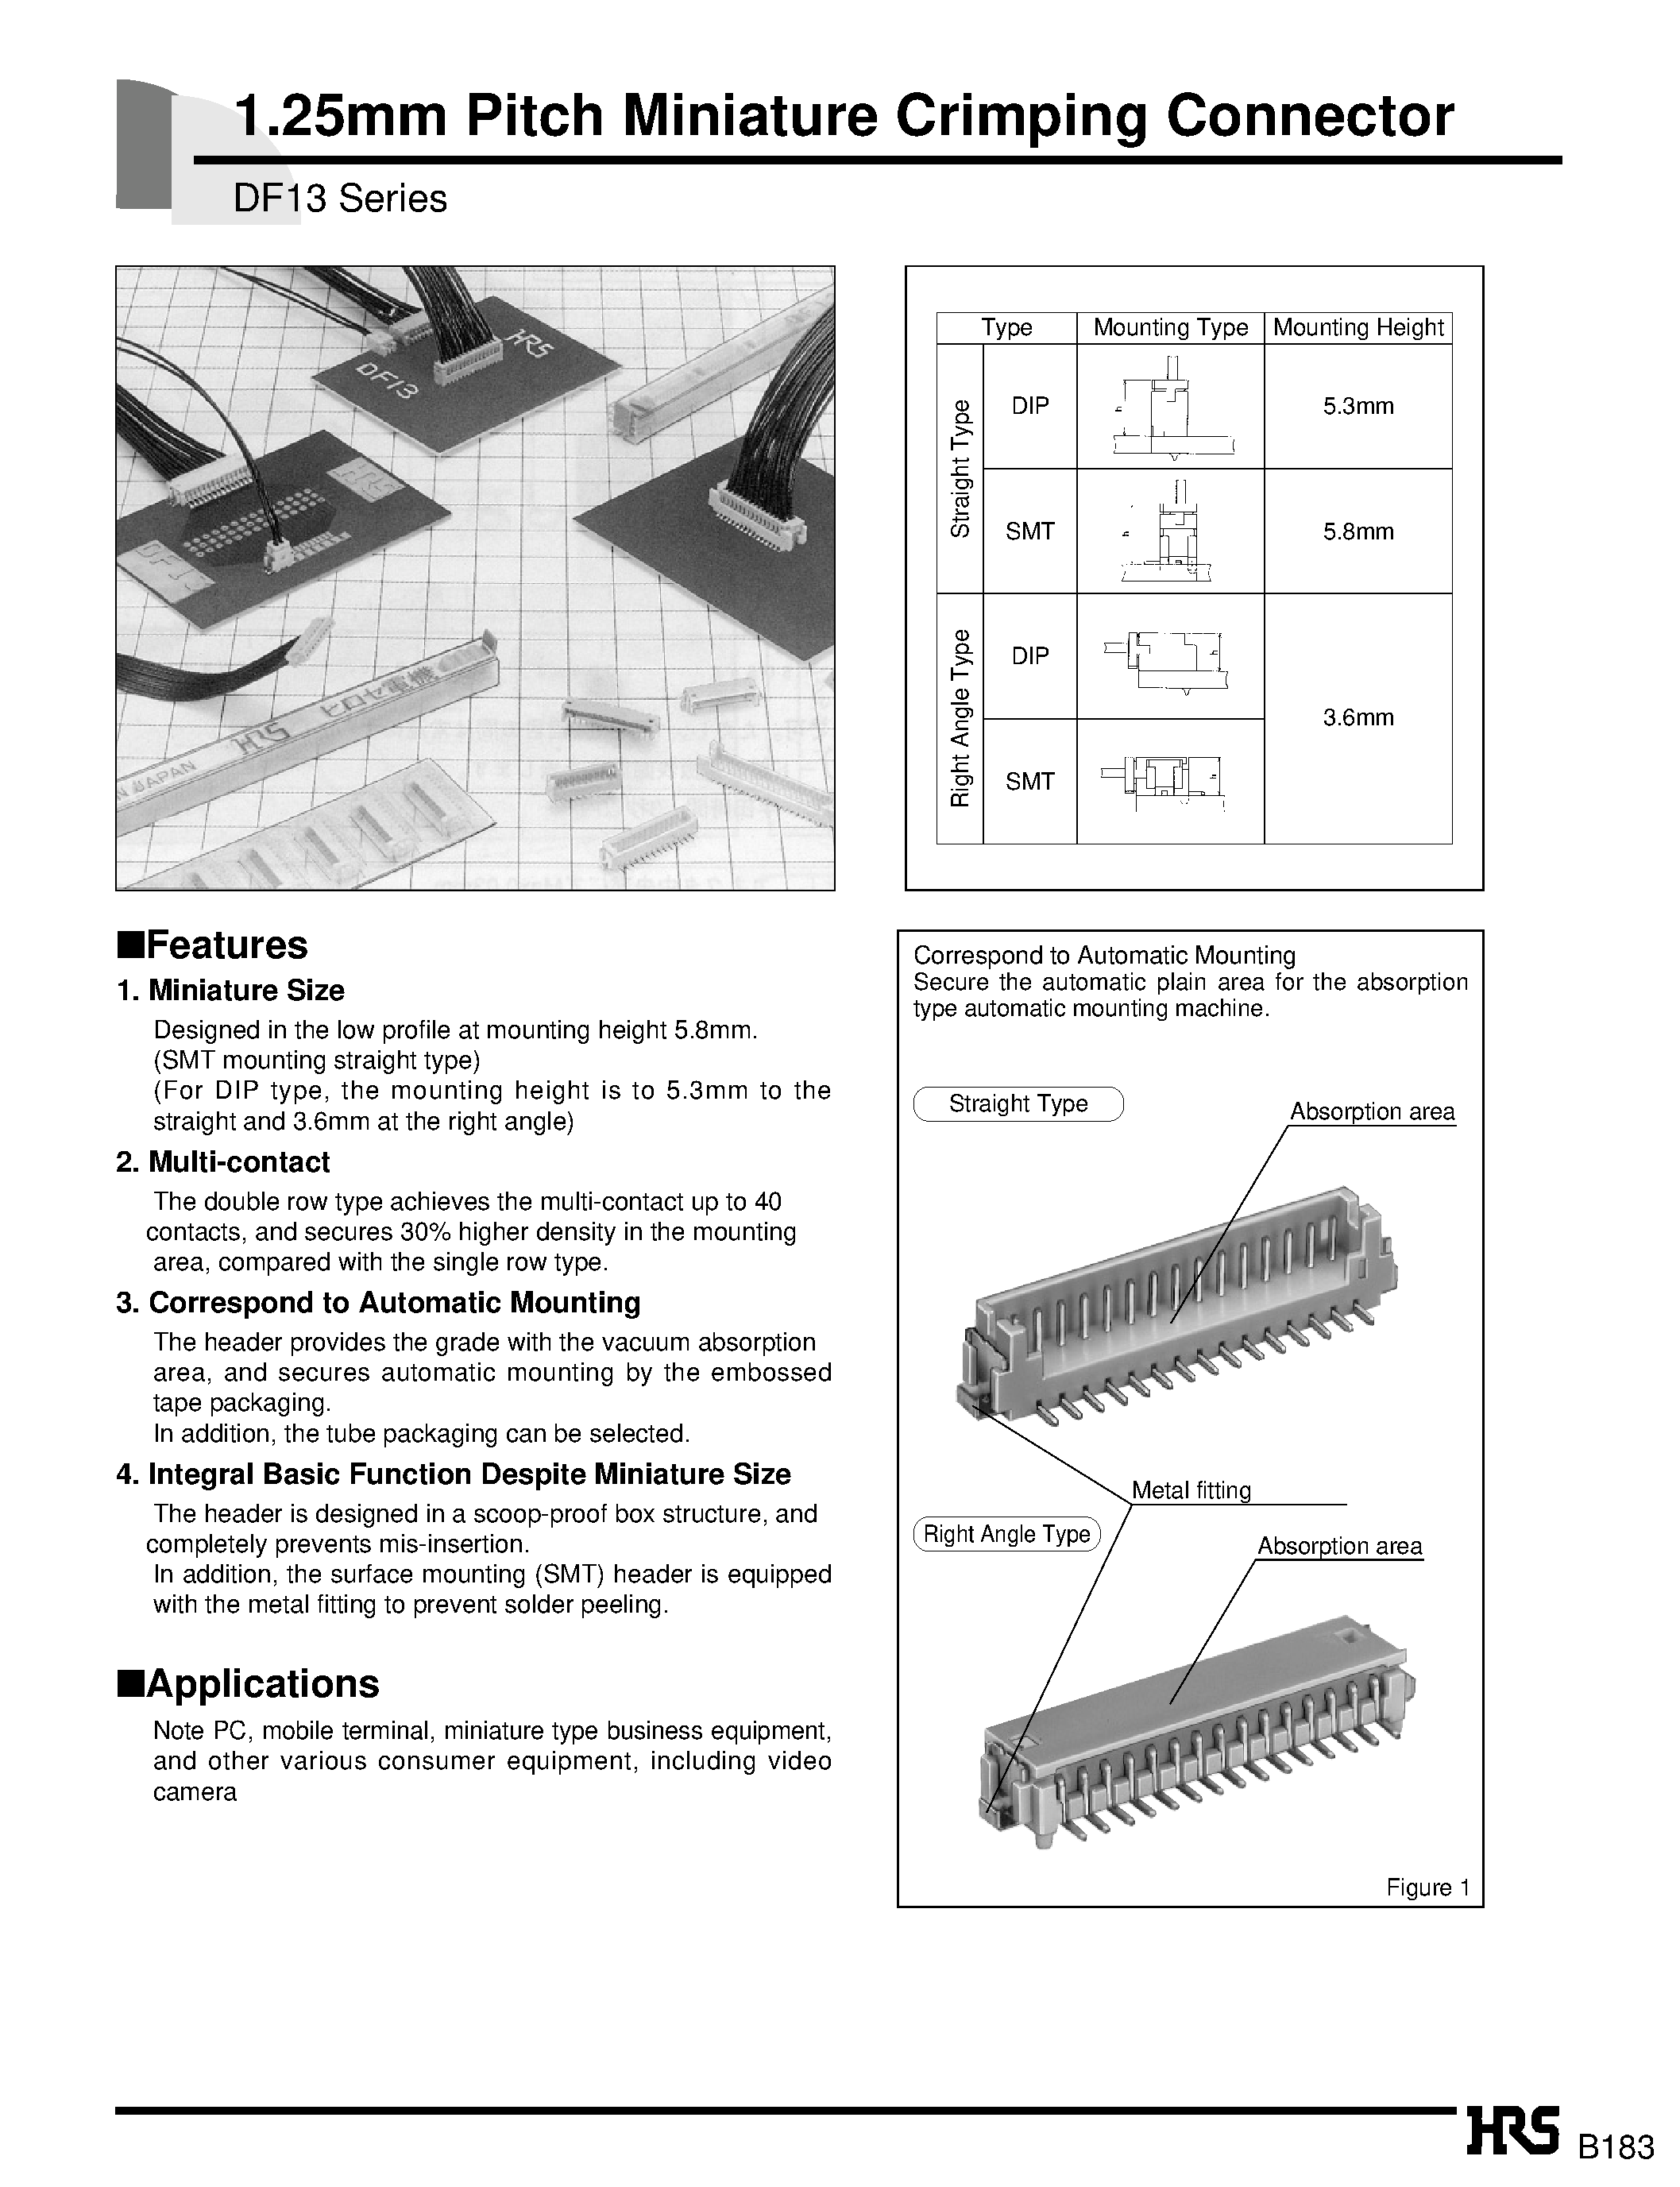 Datasheet DF13-12P-1.25DSA - 1.25mm Pitch Miniature Crimping Connector page 1